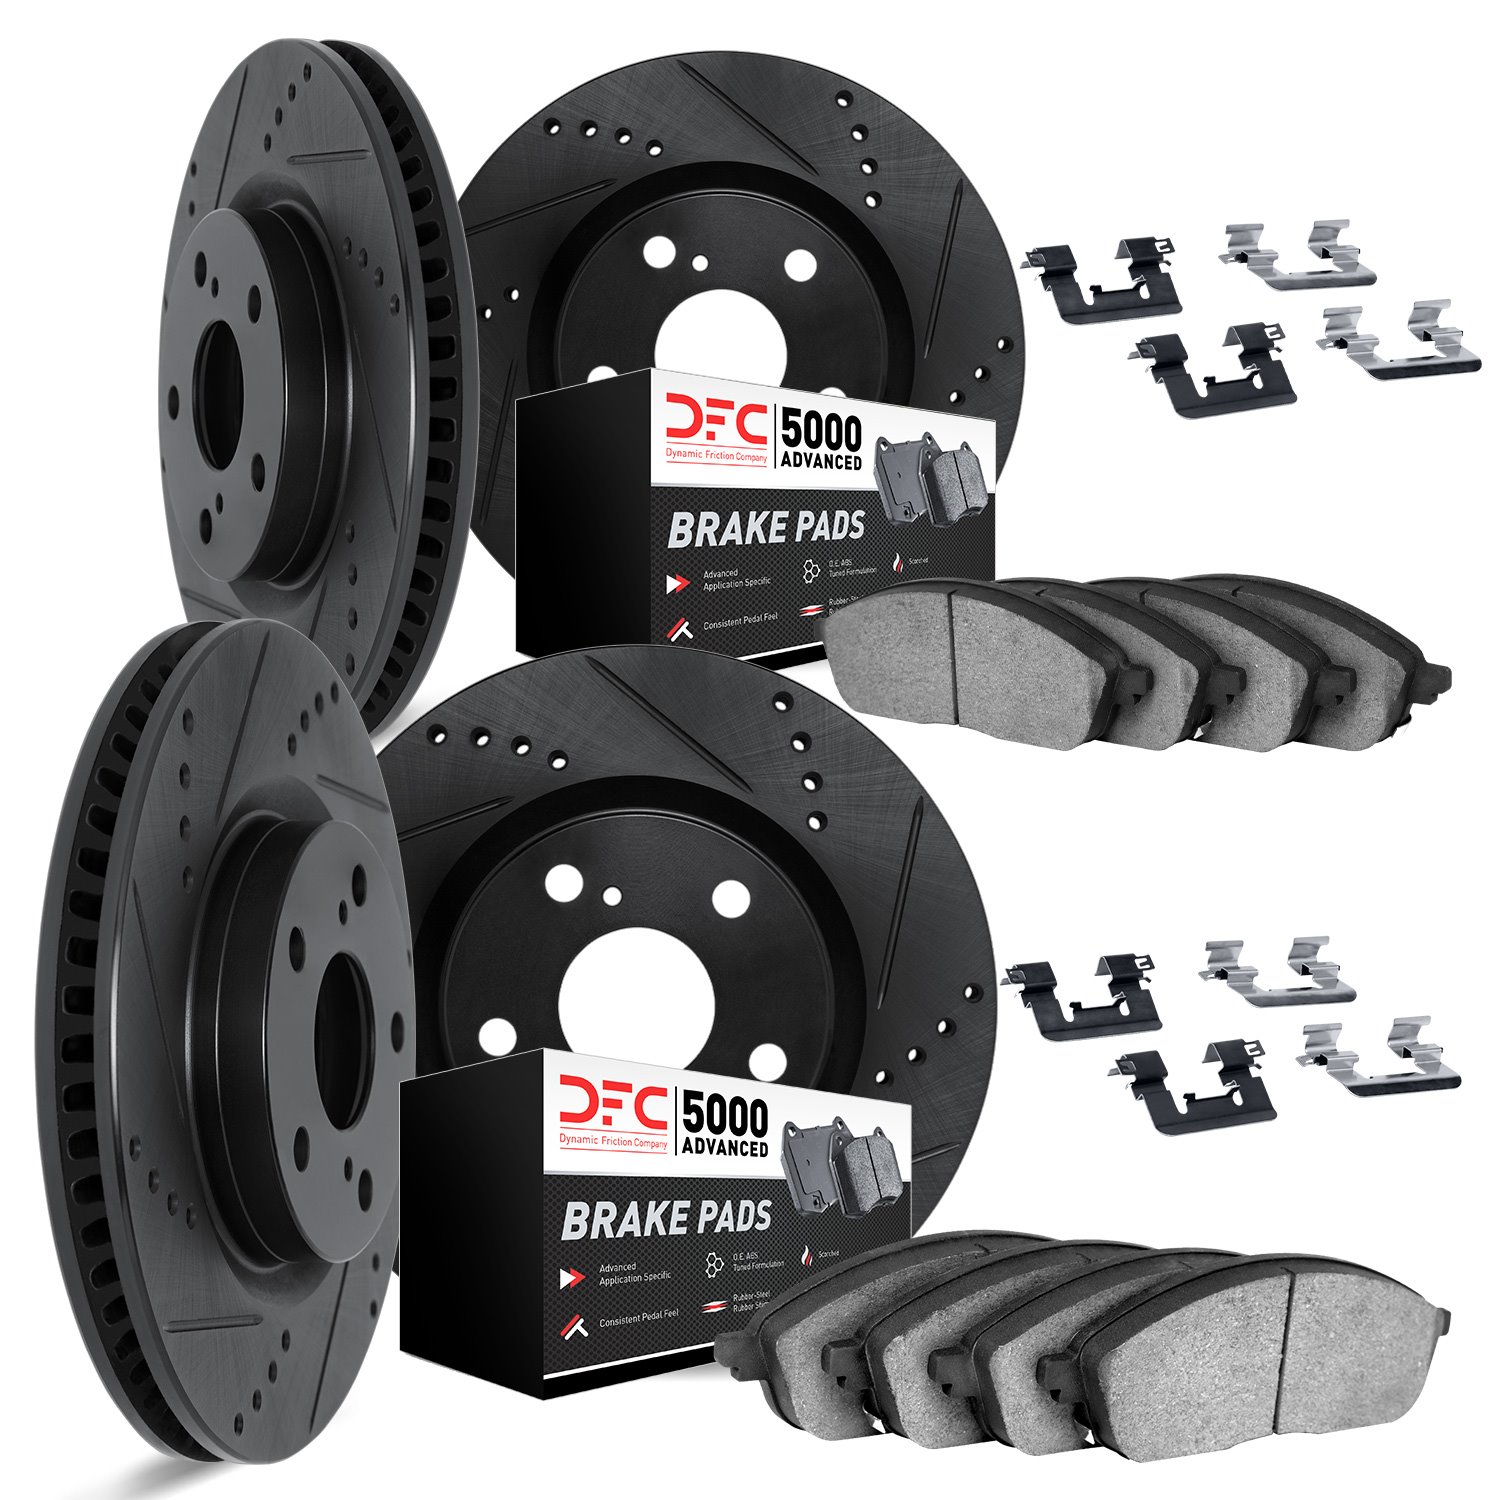 8514-31014 Drilled/Slotted Brake Rotors w/5000 Advanced Brake Pads Kit & Hardware [Black], 2006-2007 BMW, Position: Front and Re